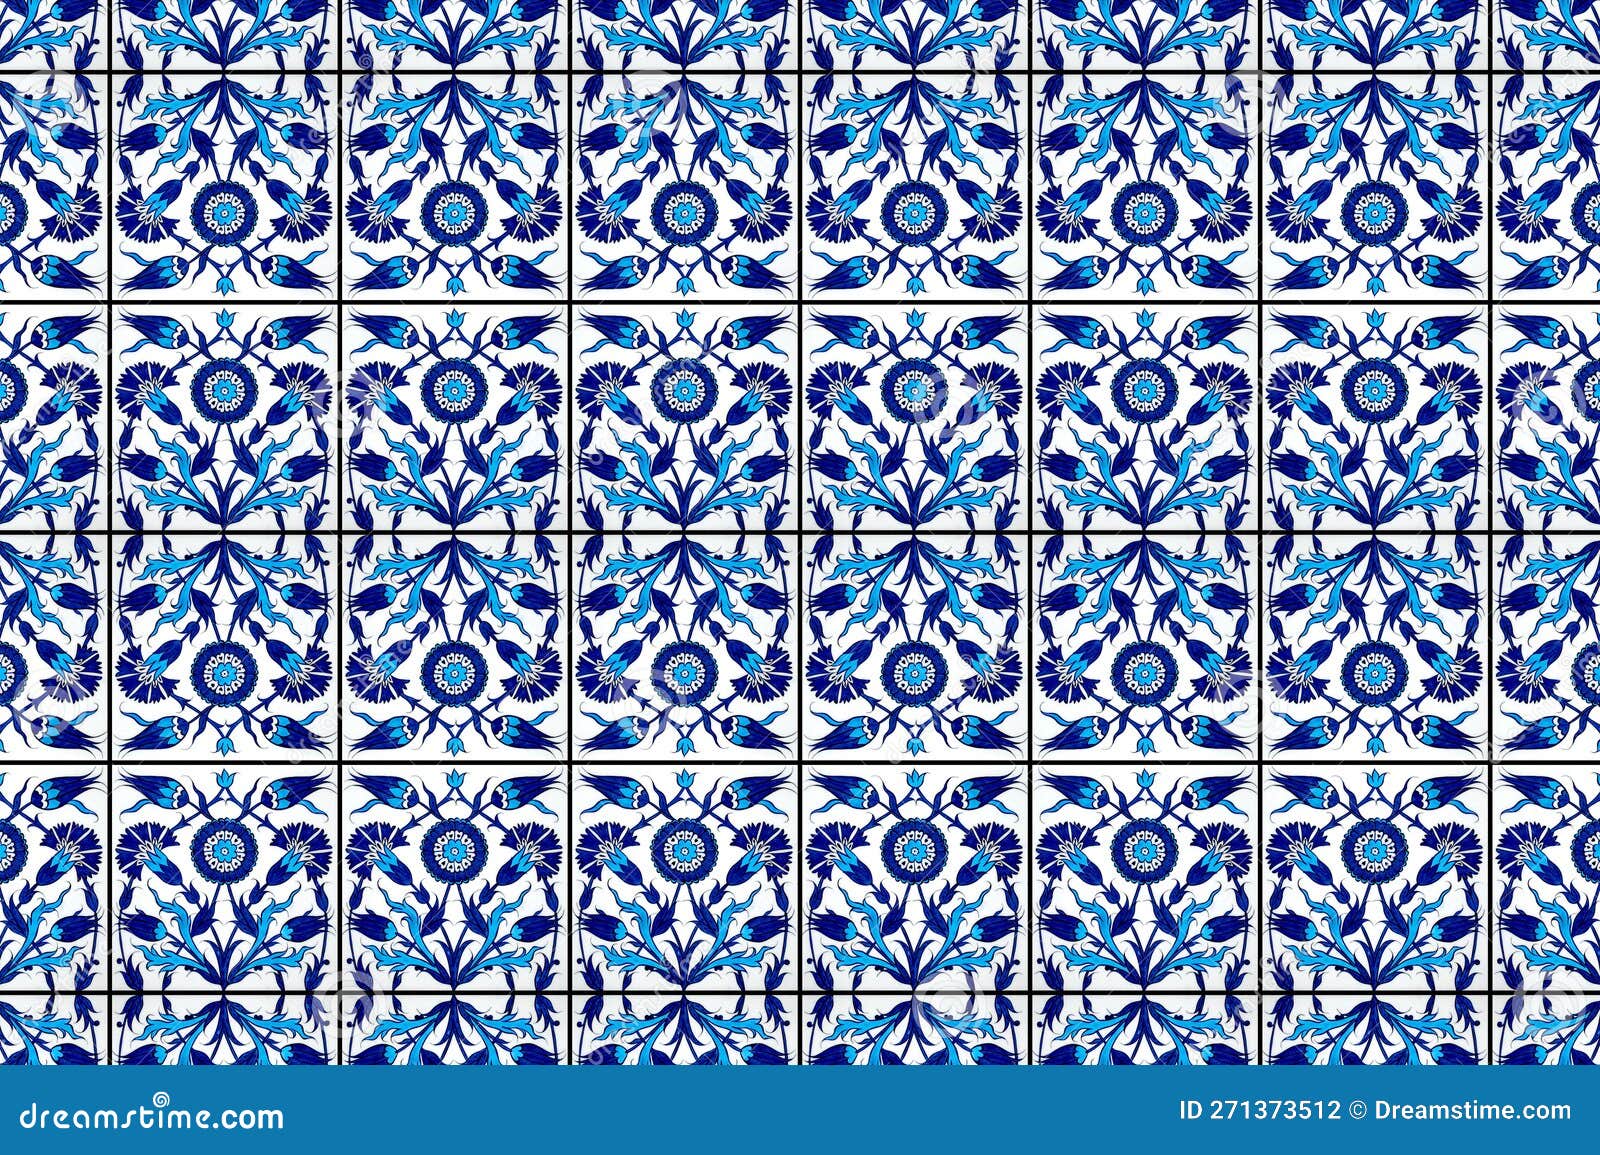 Ottoman Iznik Tiles Design With Wall And Dome For Mosques Royalty Free